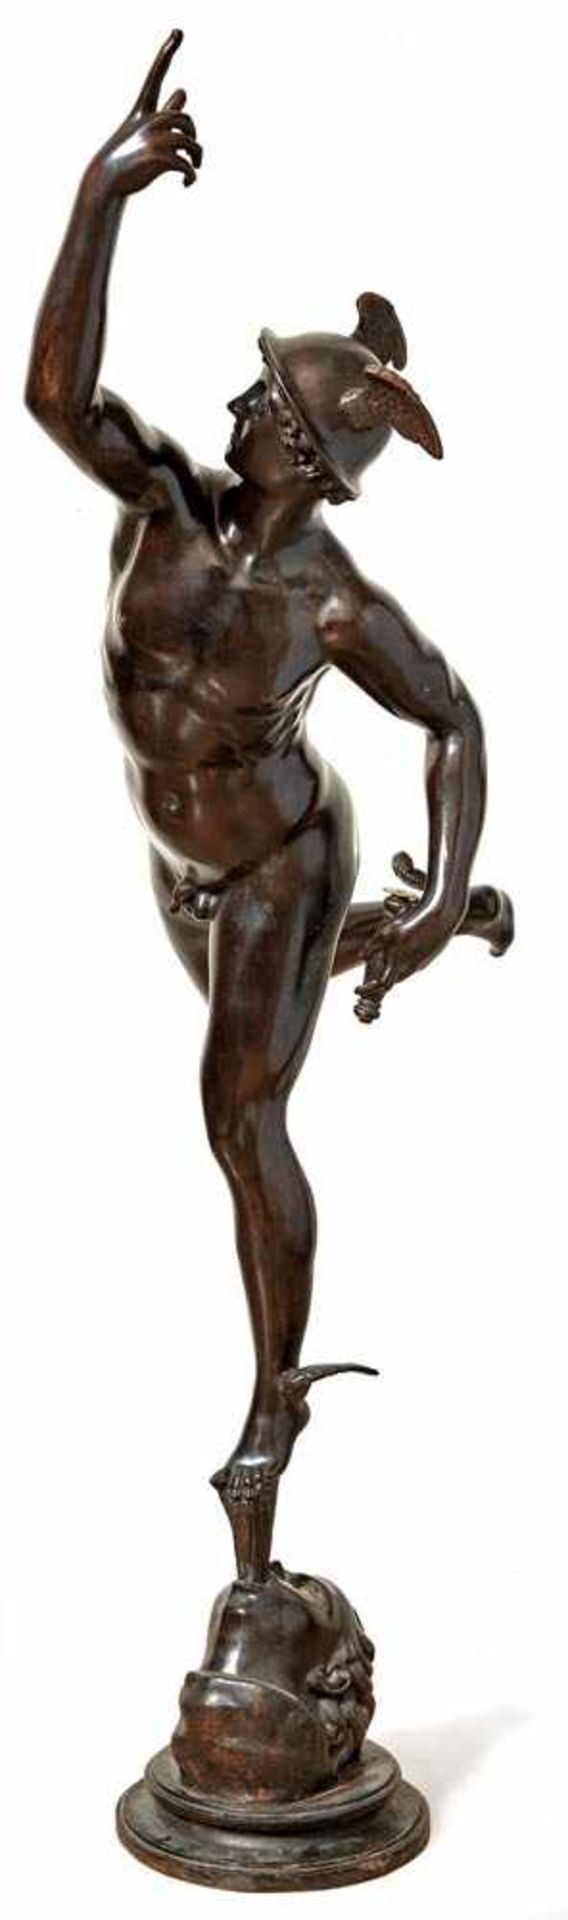 Flying Mercury19th century, after Giovanni Bologna, gen. GiambolognaOn a profiled pedestal above the